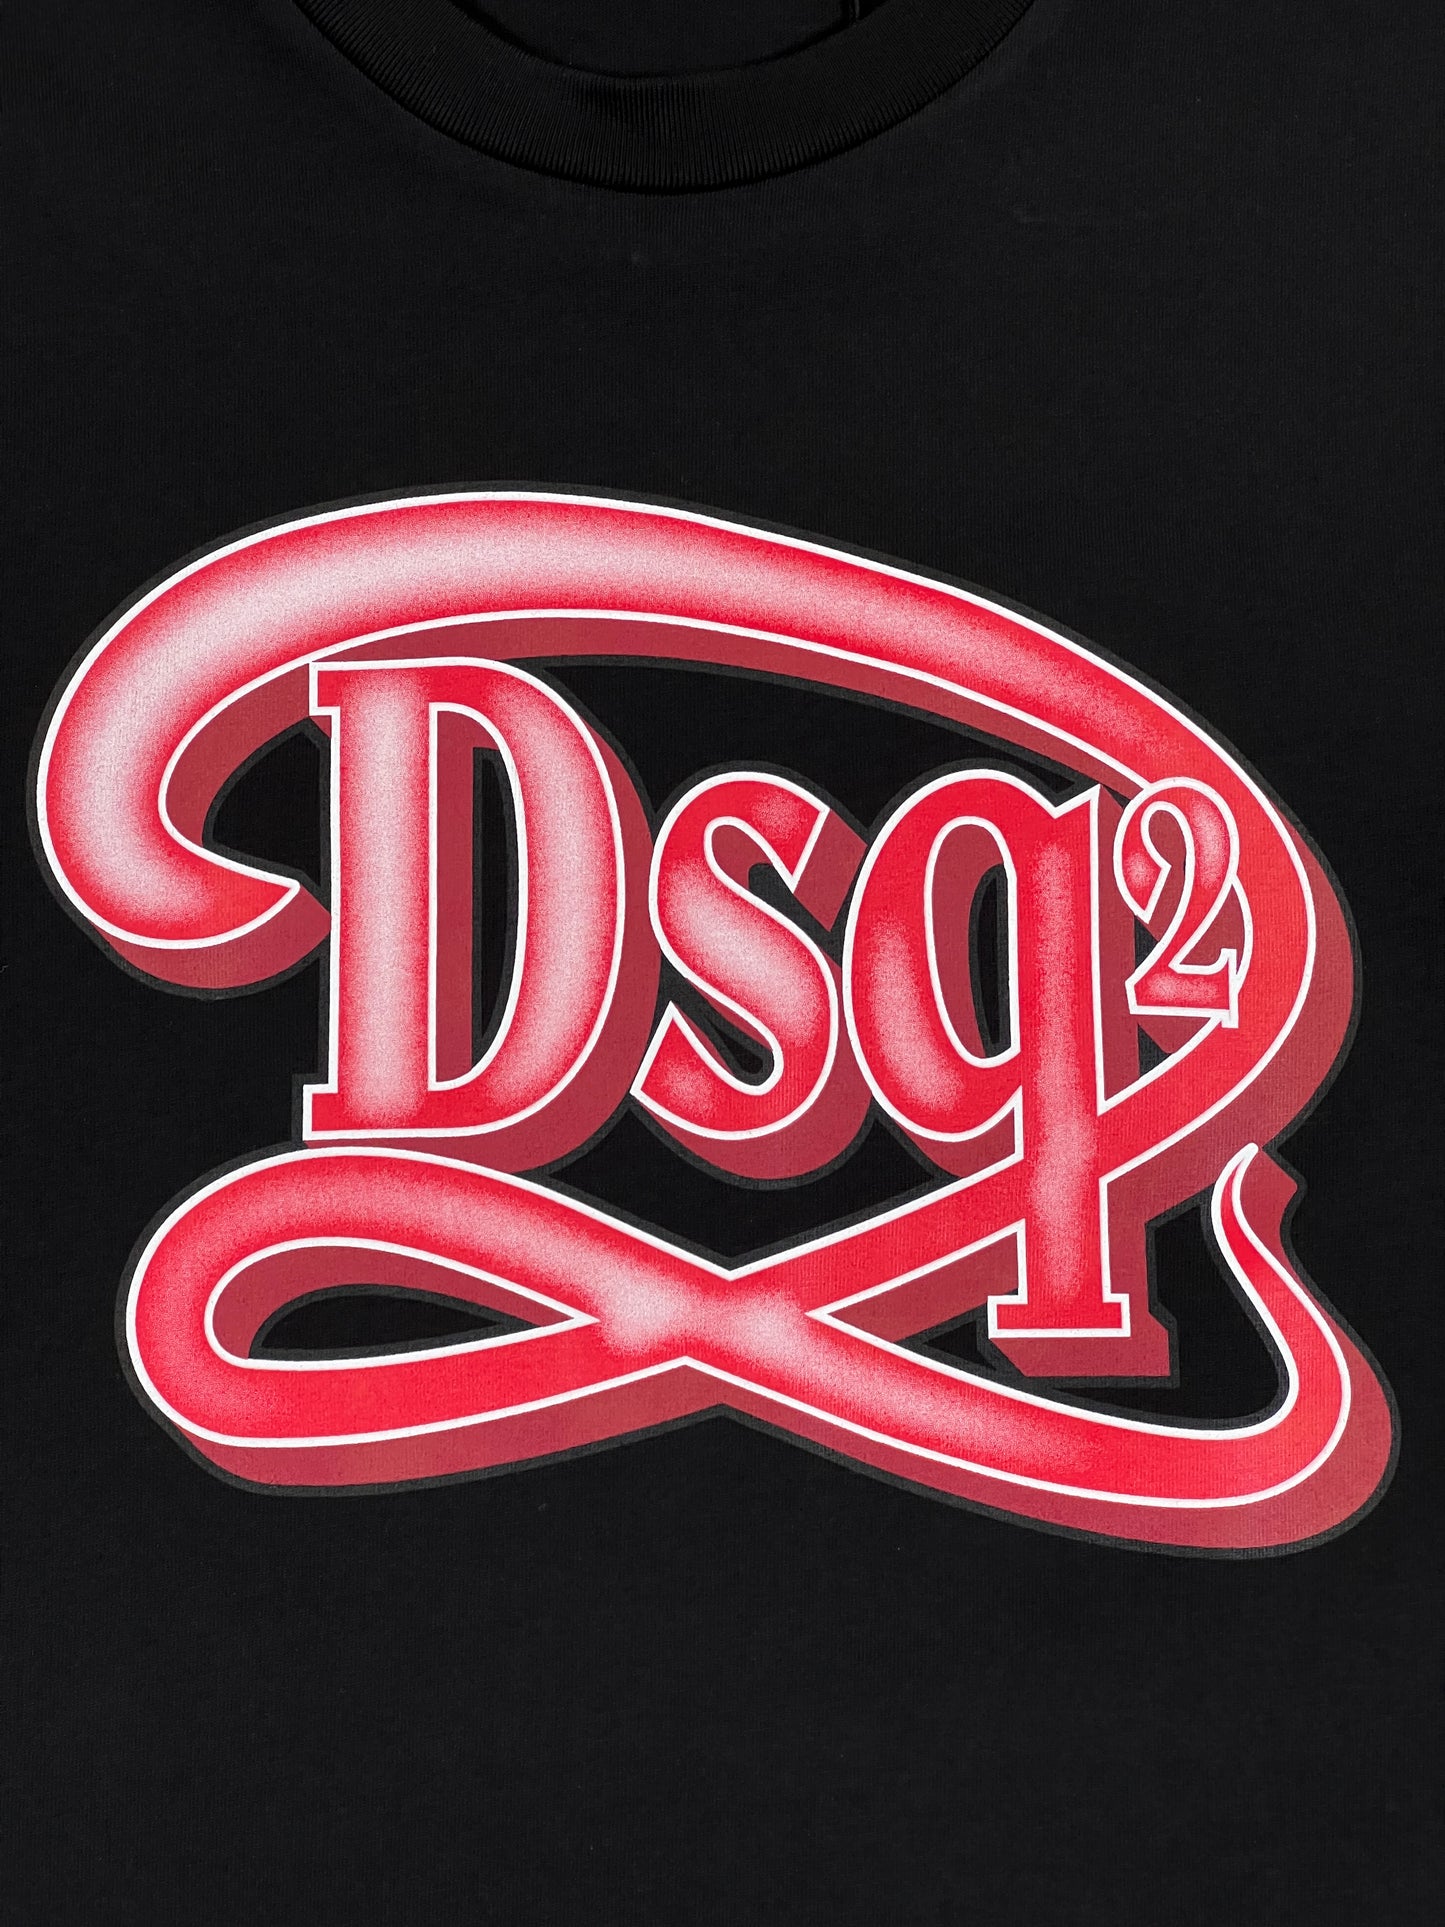 Red and white DSQUARED2 logo on a black background, made in Romania.